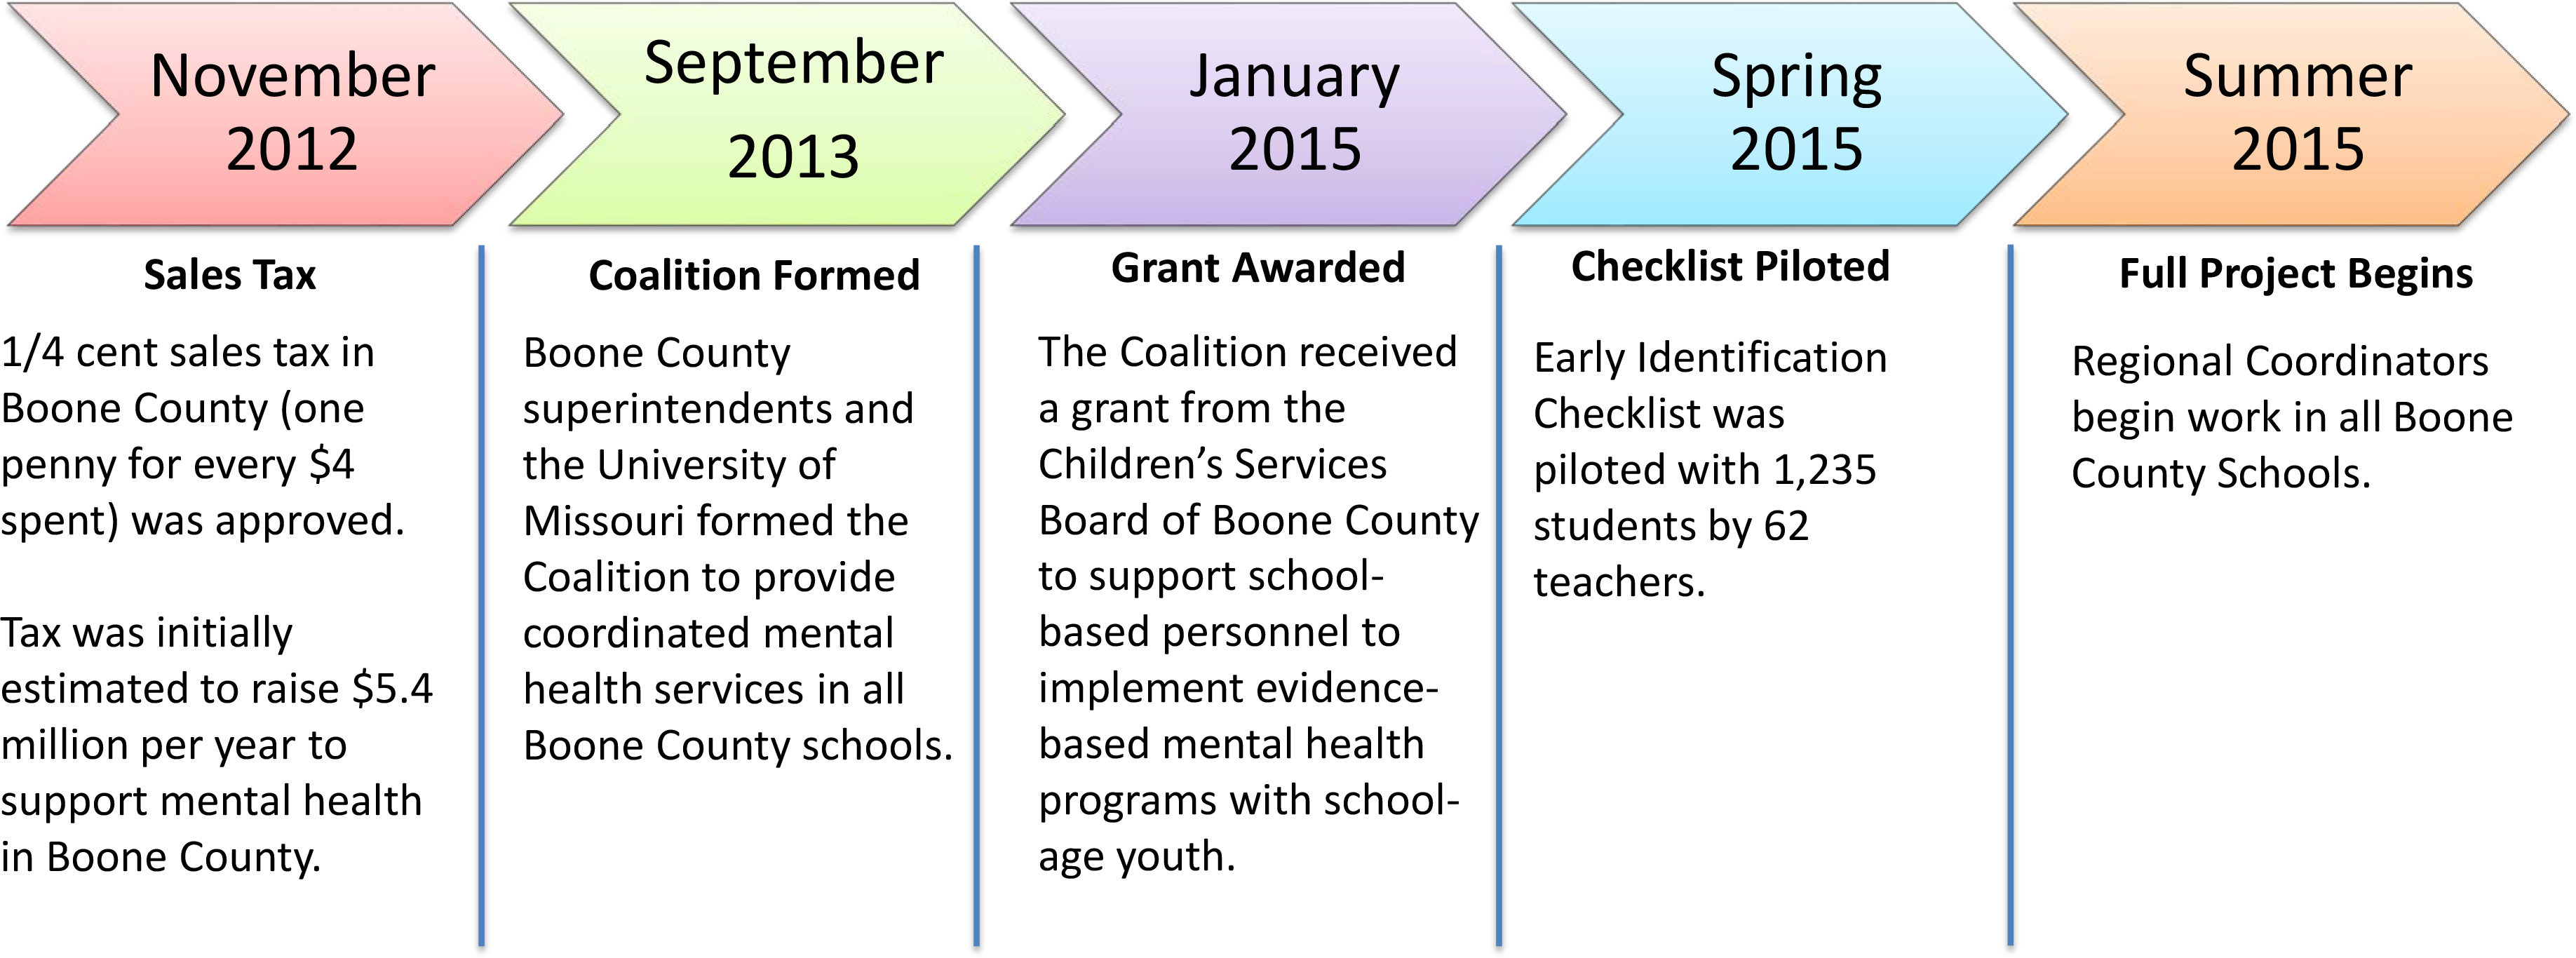 Coalition Timeline Graphic